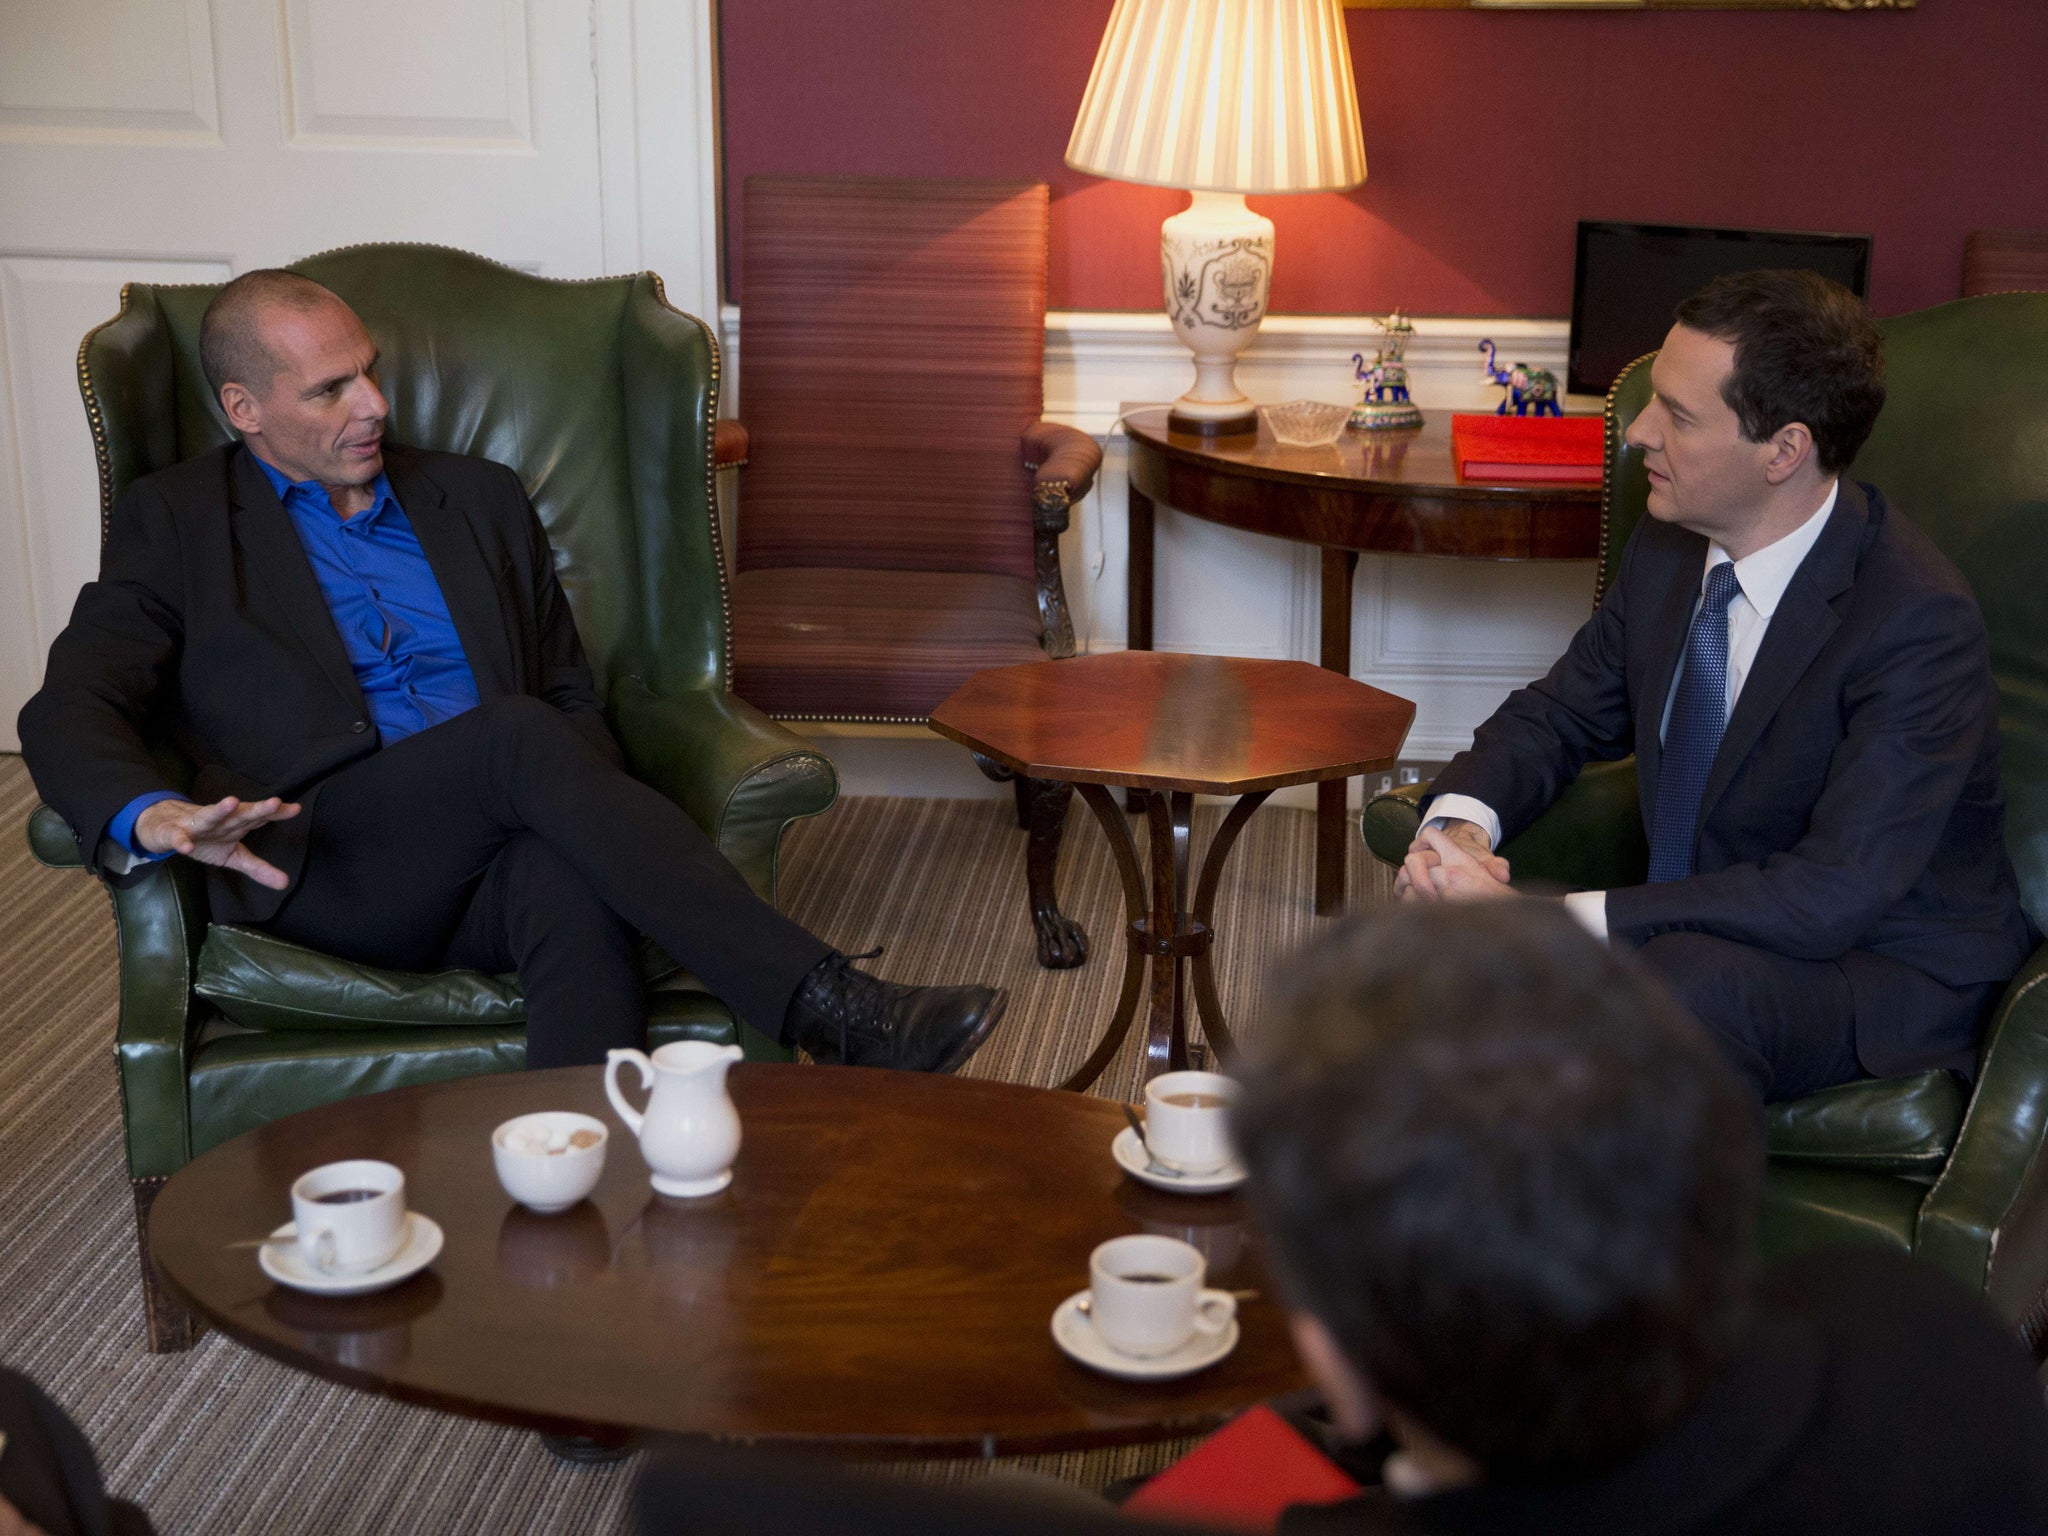 Greek Finance Minister Yanis Varoufakis (L) meets with Britain's Finance Minister George Osborne at 11 Downing Street in London on February 2, 2015.